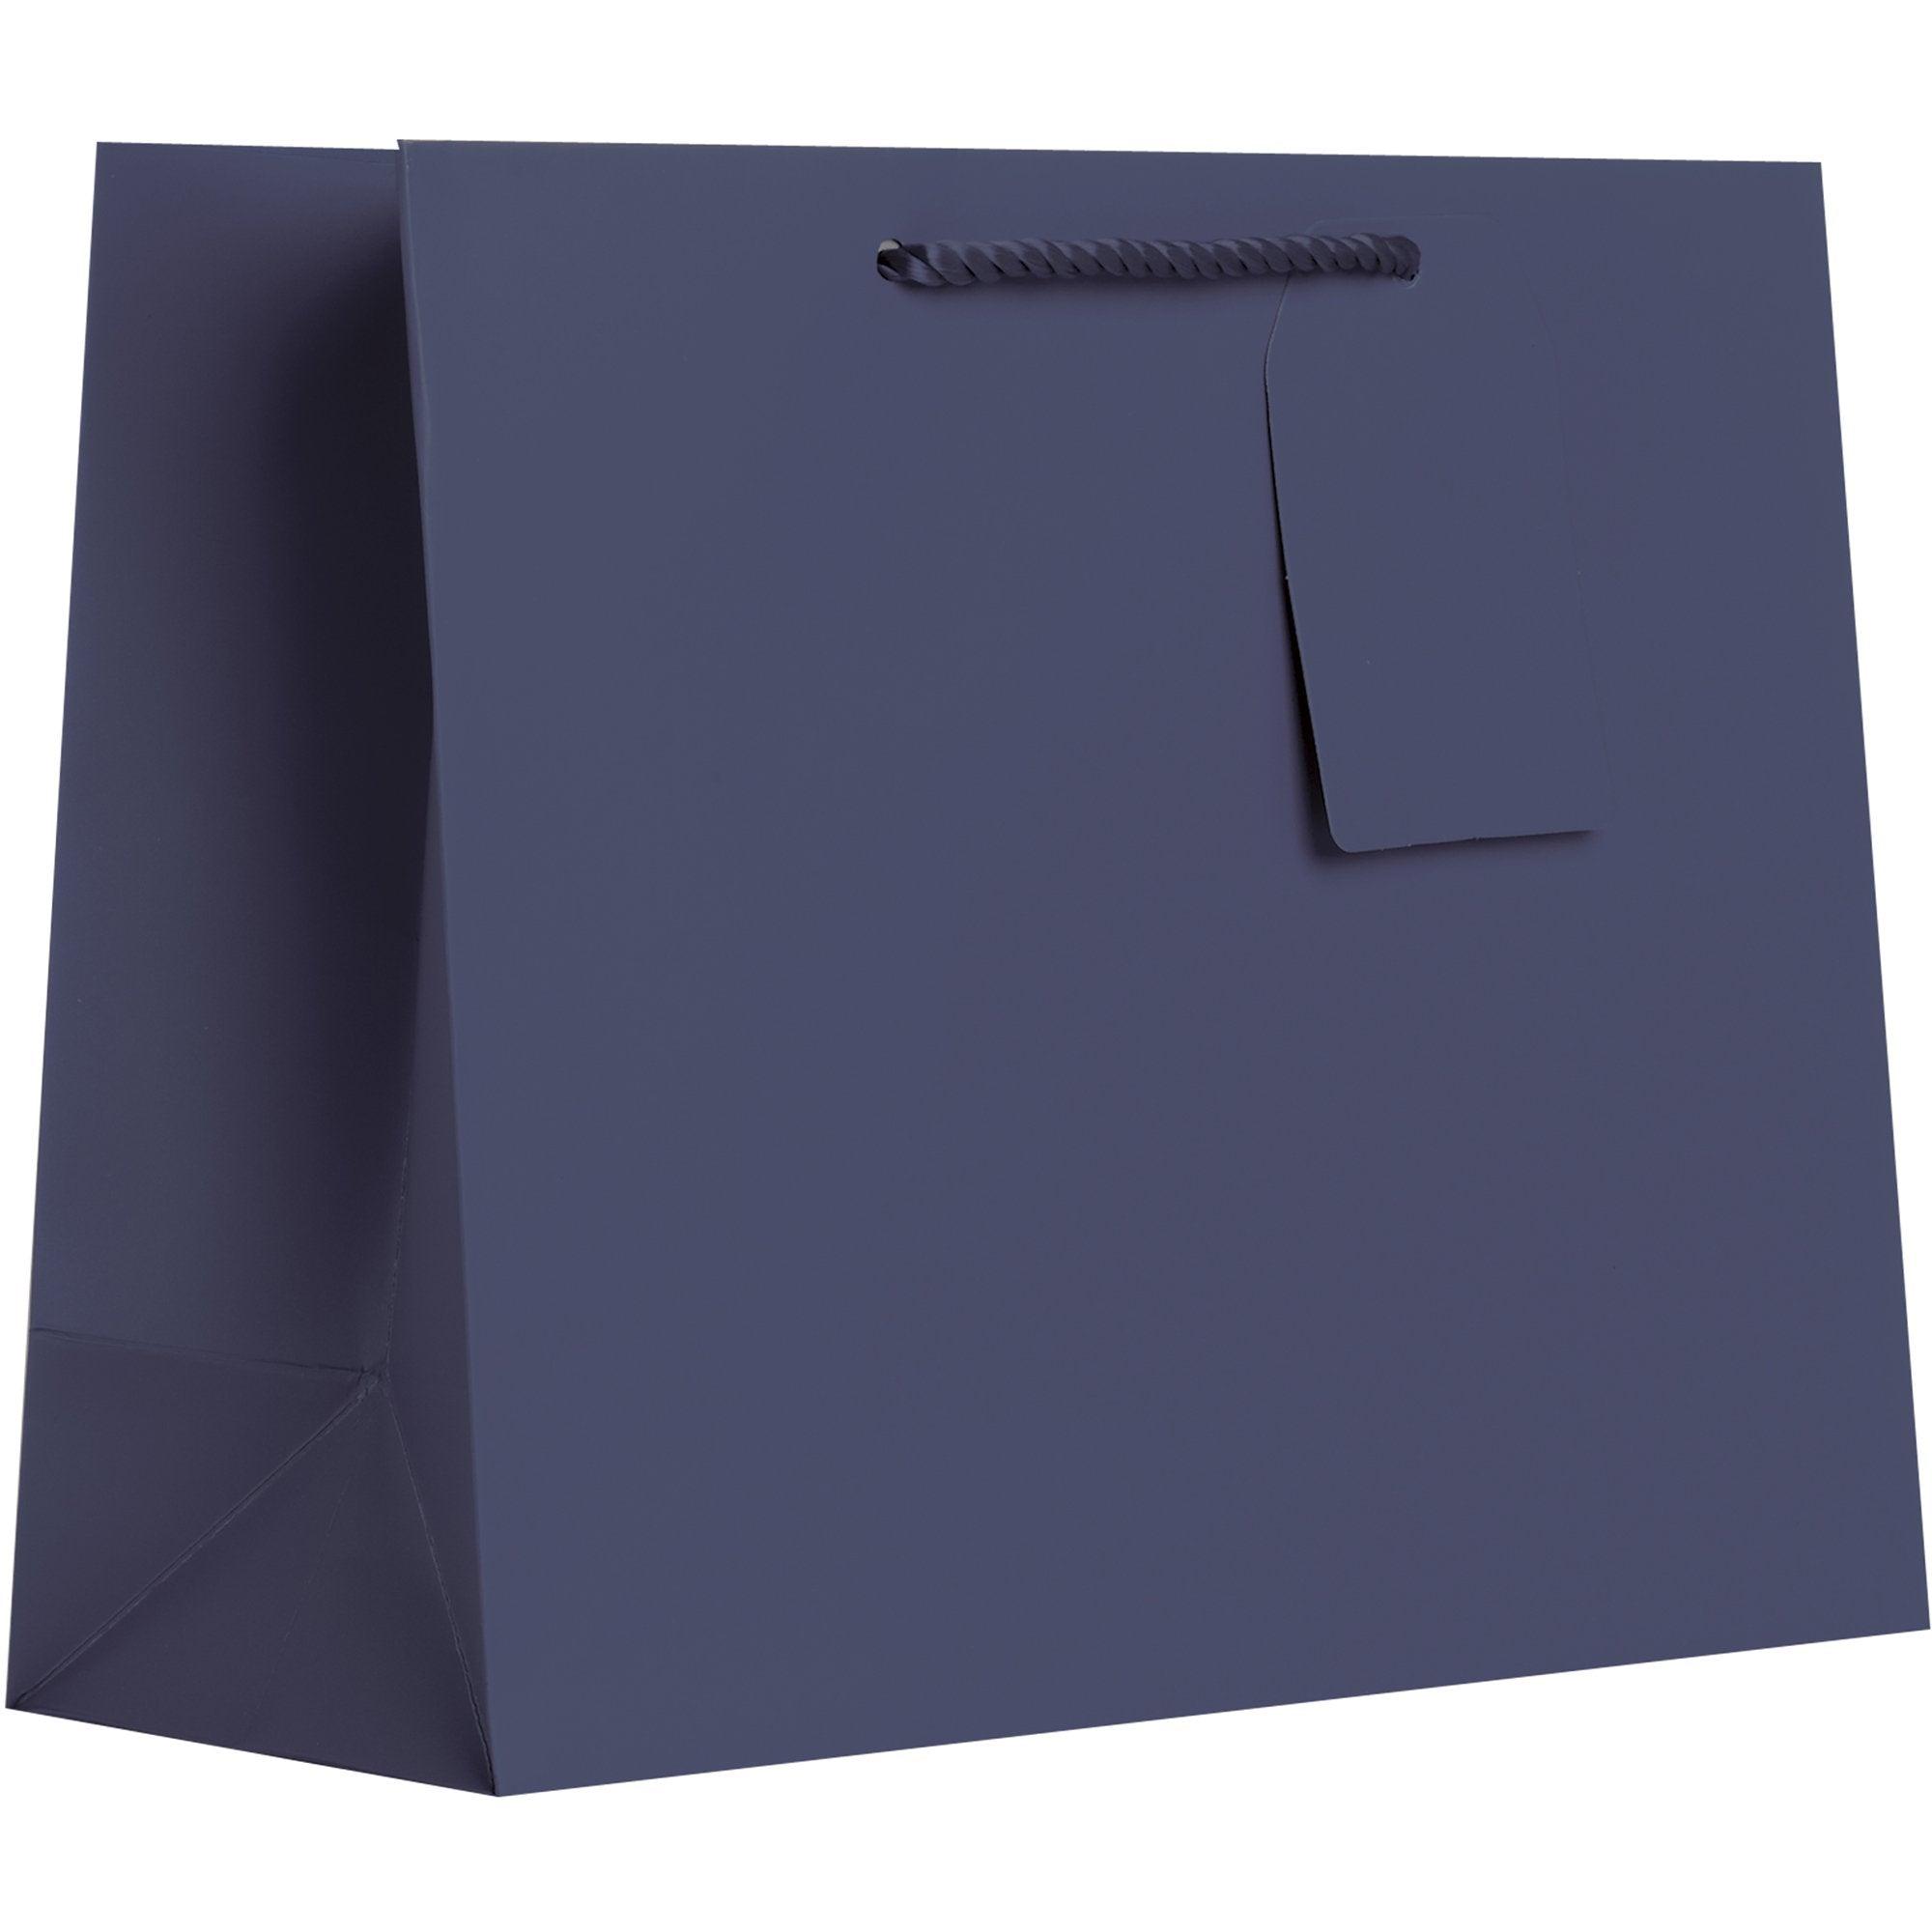 Heavyweight Solid Color Large Gift Bags, Matte Navy Blue by Present Paper - Vysn